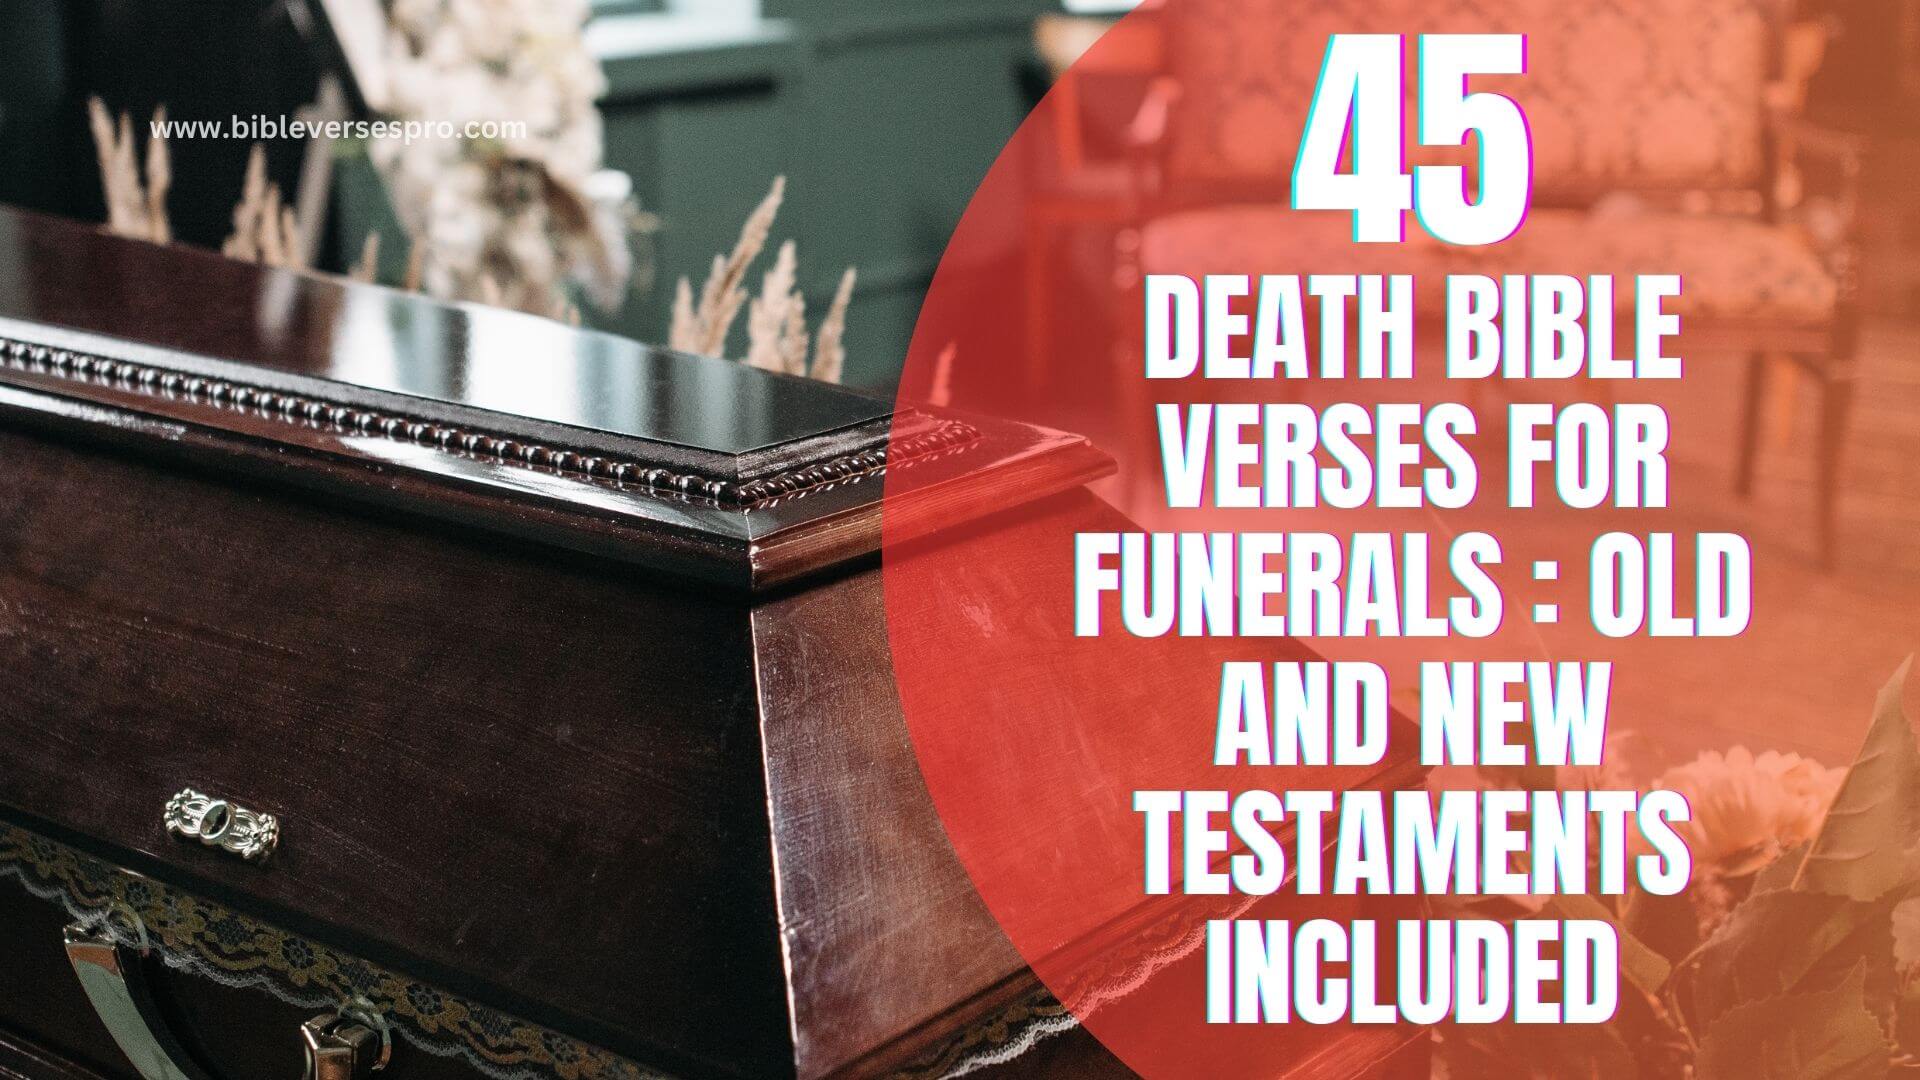 DEATH BIBLE VERSES FOR FUNERALS OLD AND NEW TESTAMENTS INCLUDED